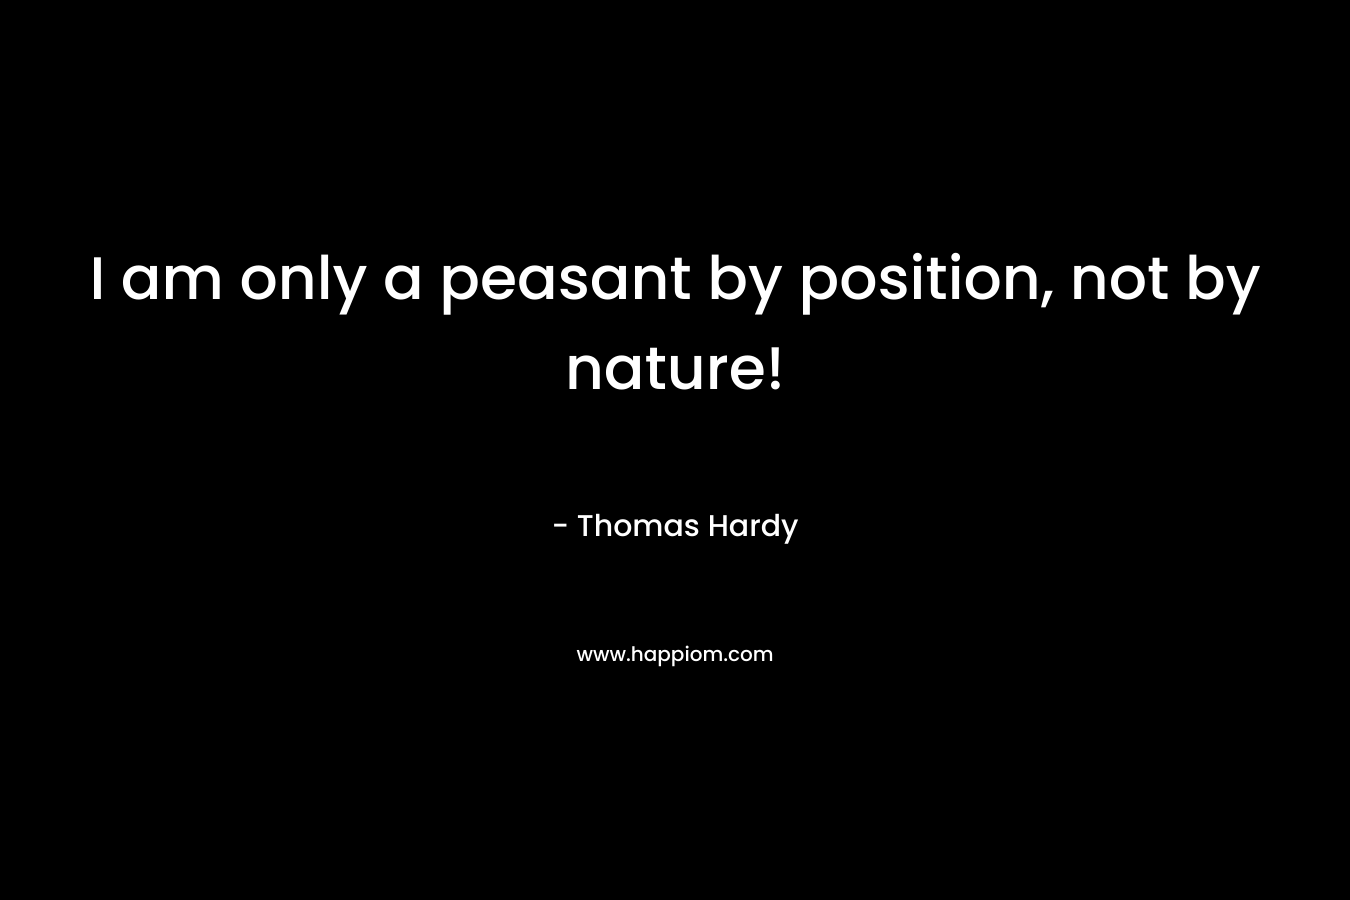 I am only a peasant by position, not by nature!